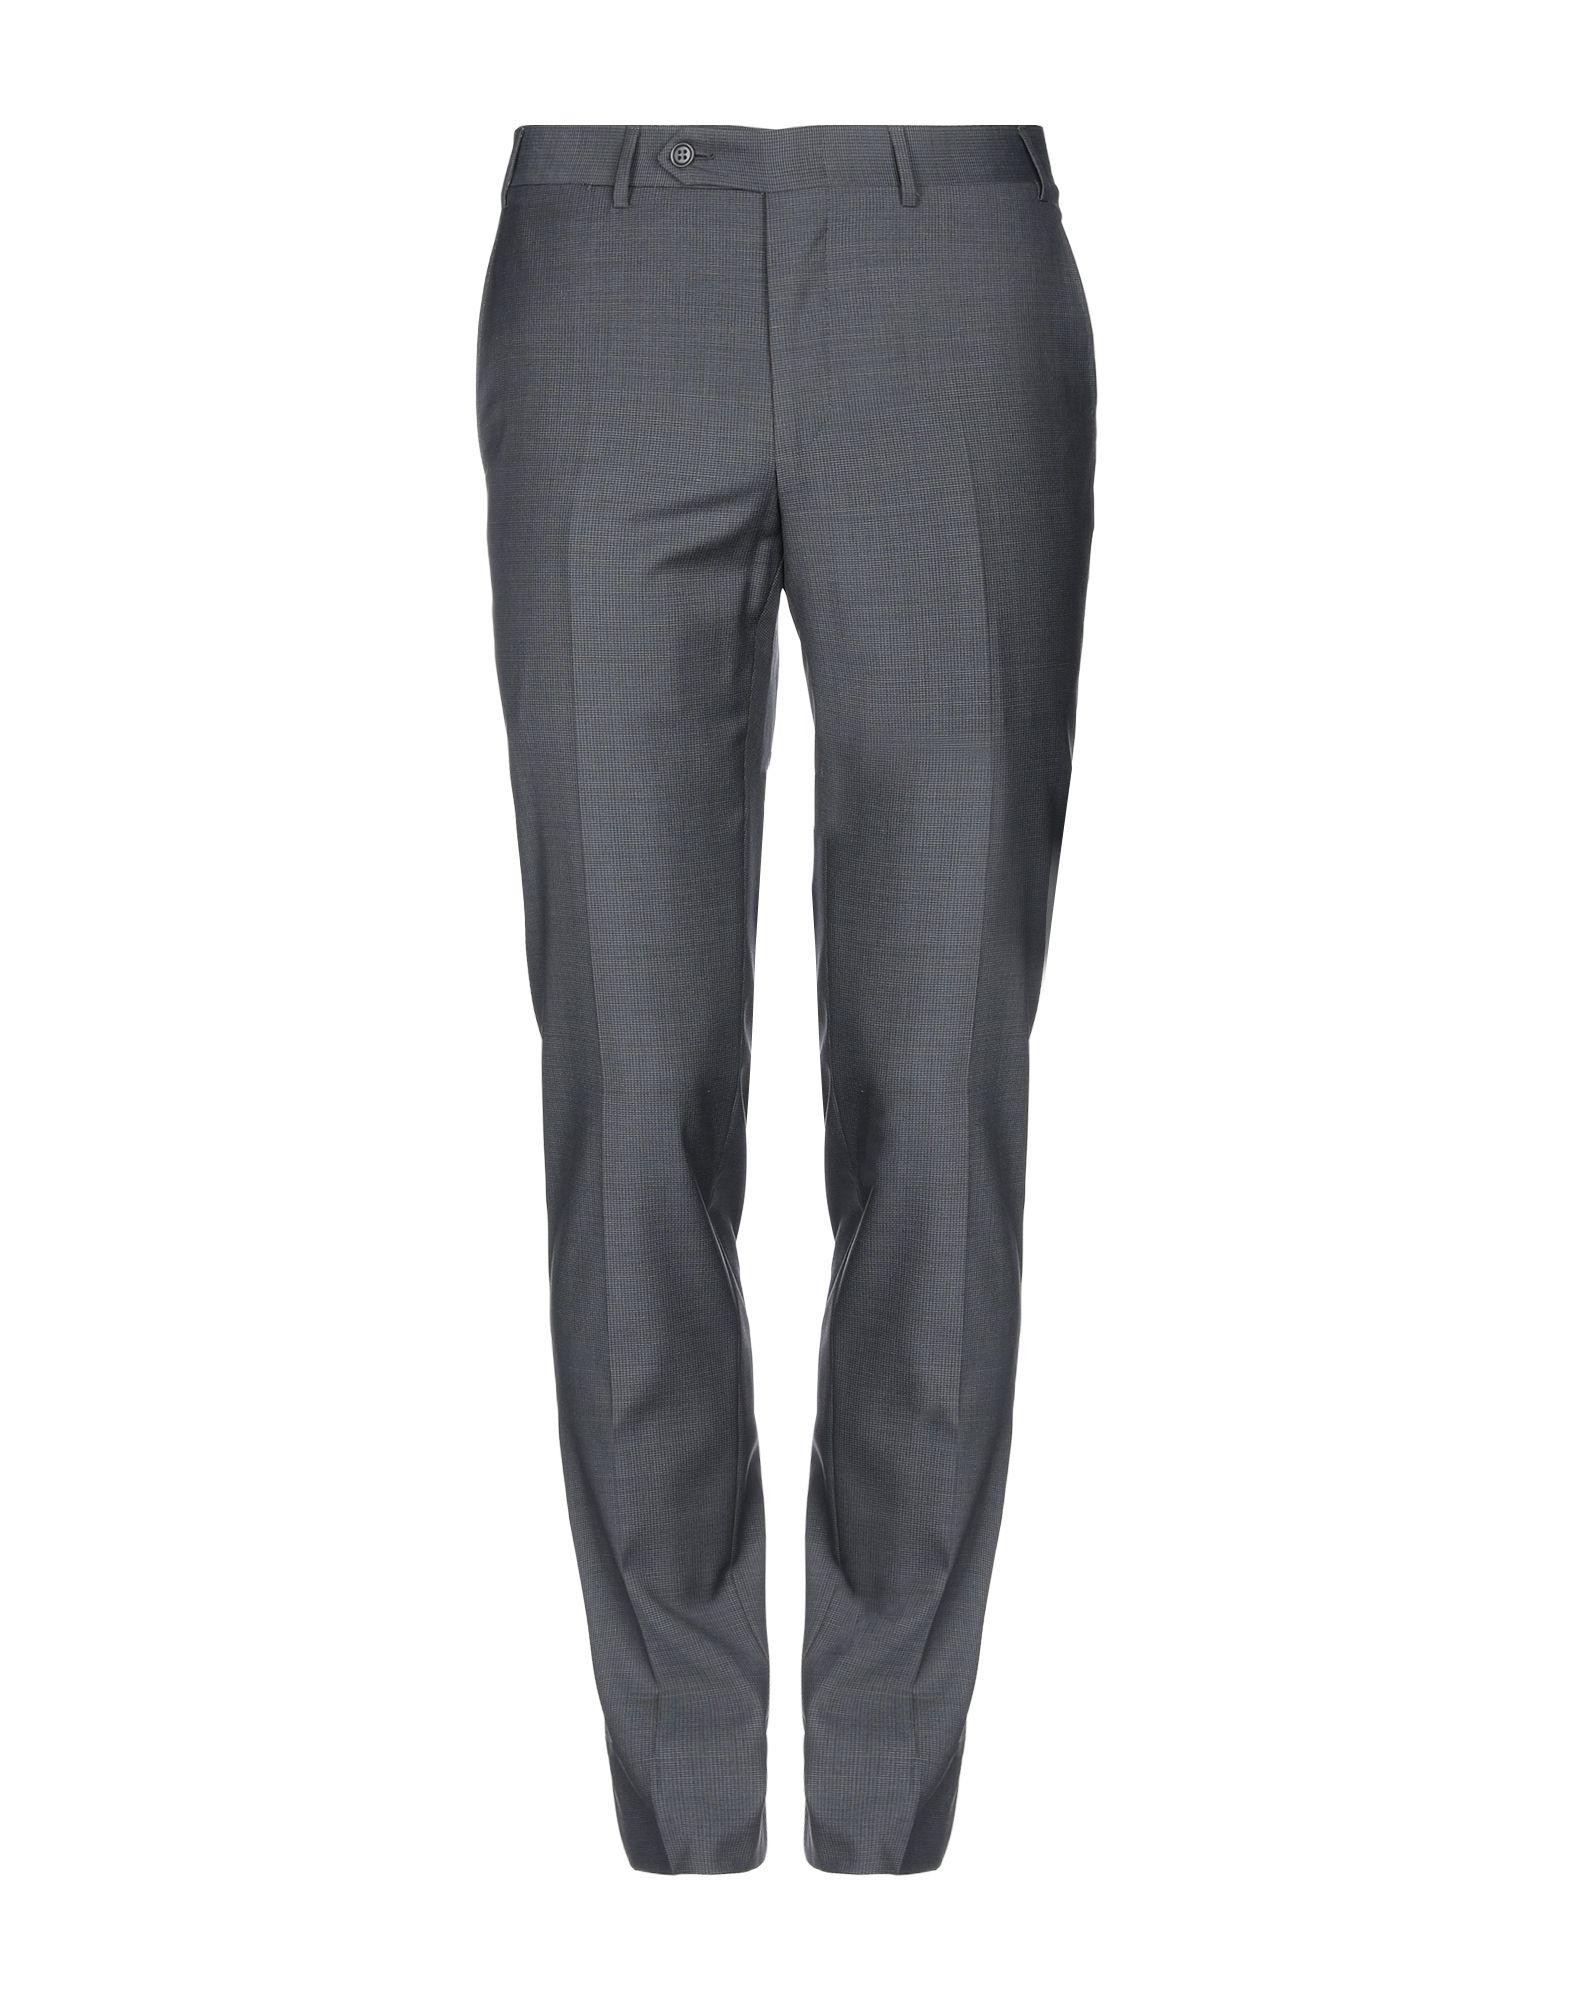 Canali Wool Casual Pants in Lead (Gray) for Men - Lyst